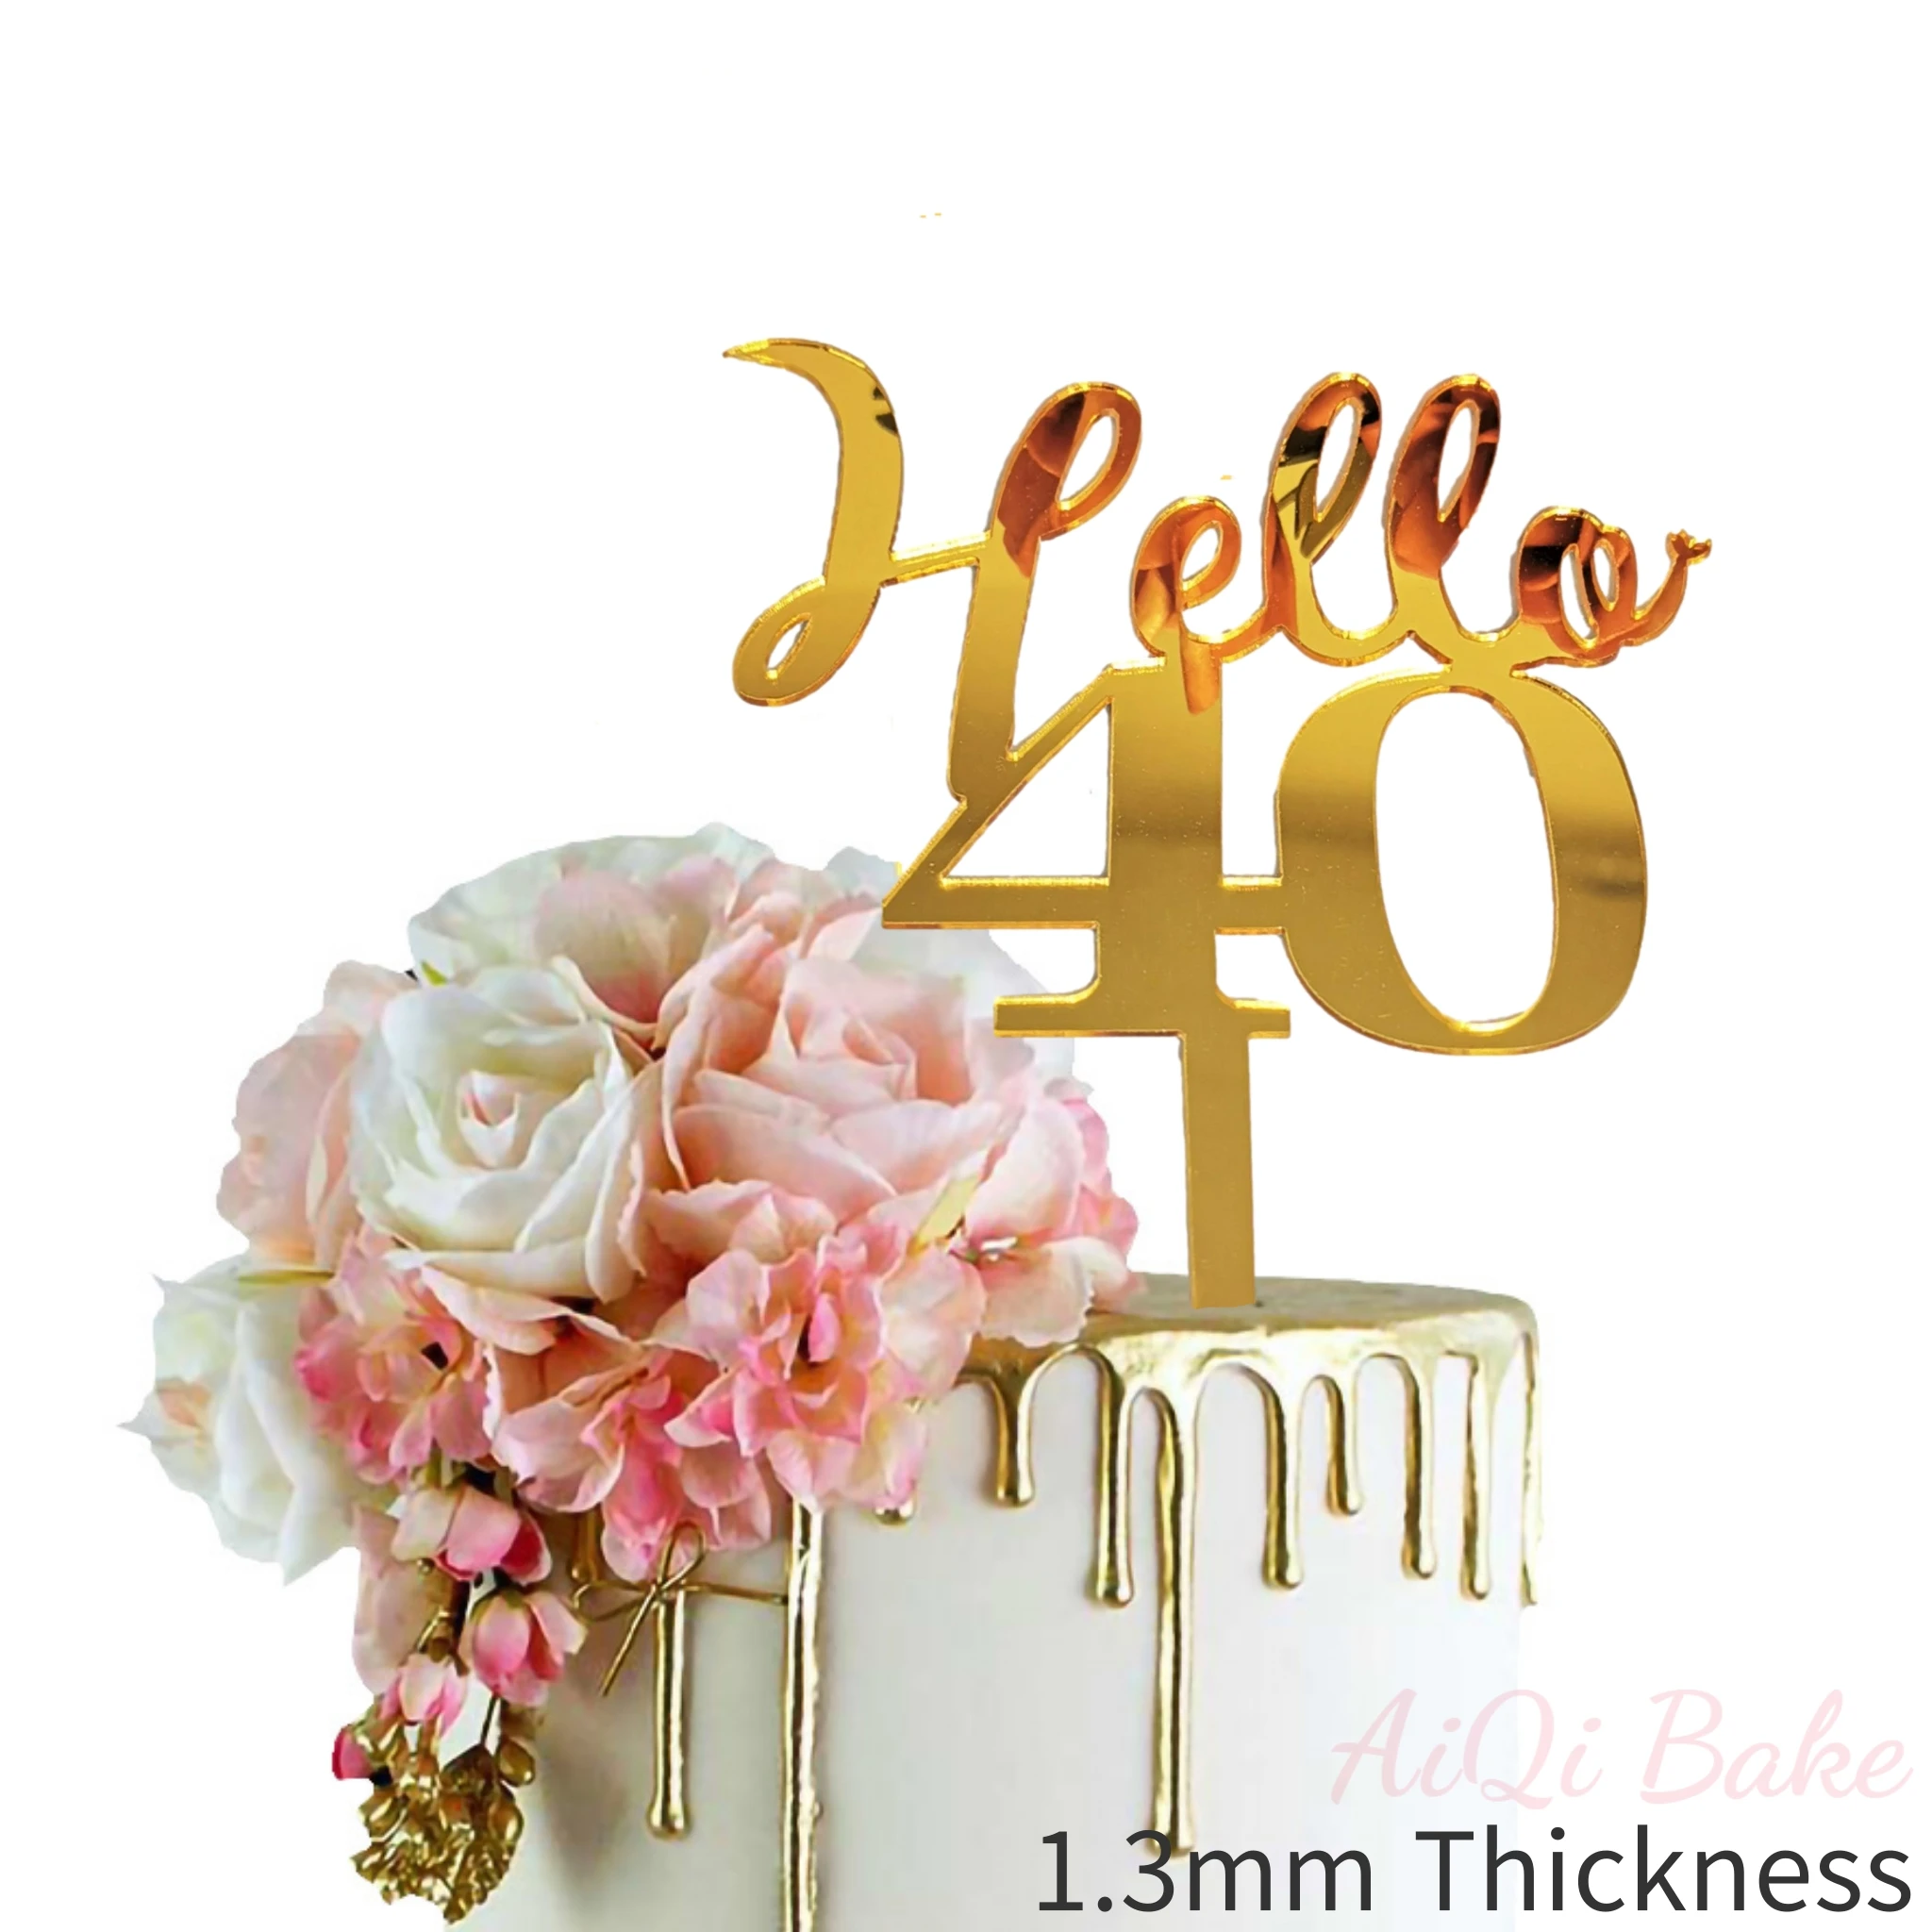 1.3mm Thickness Hello 21 30 40 50 60 Hand Writing Cake Toppers Happy Birthday Party Decoration